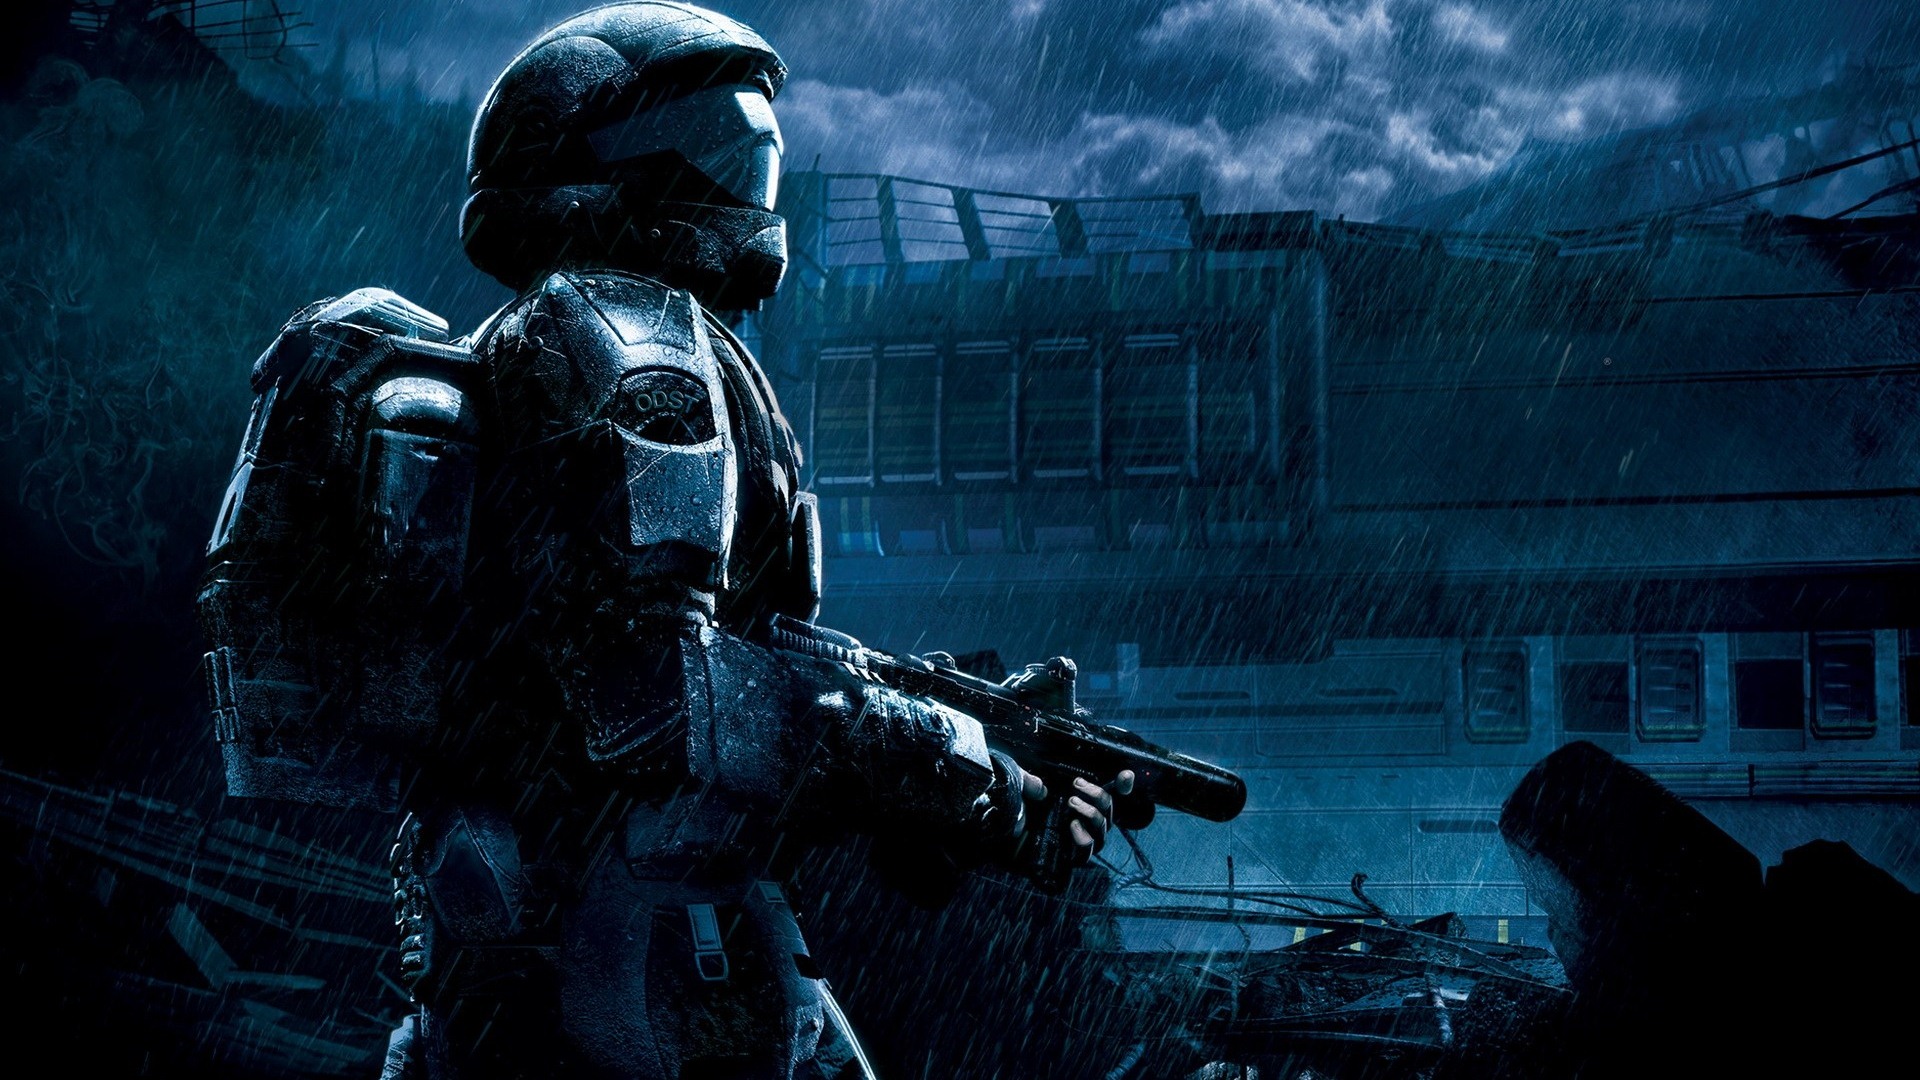 Halo game HD wallpapers #5 - 1920x1080